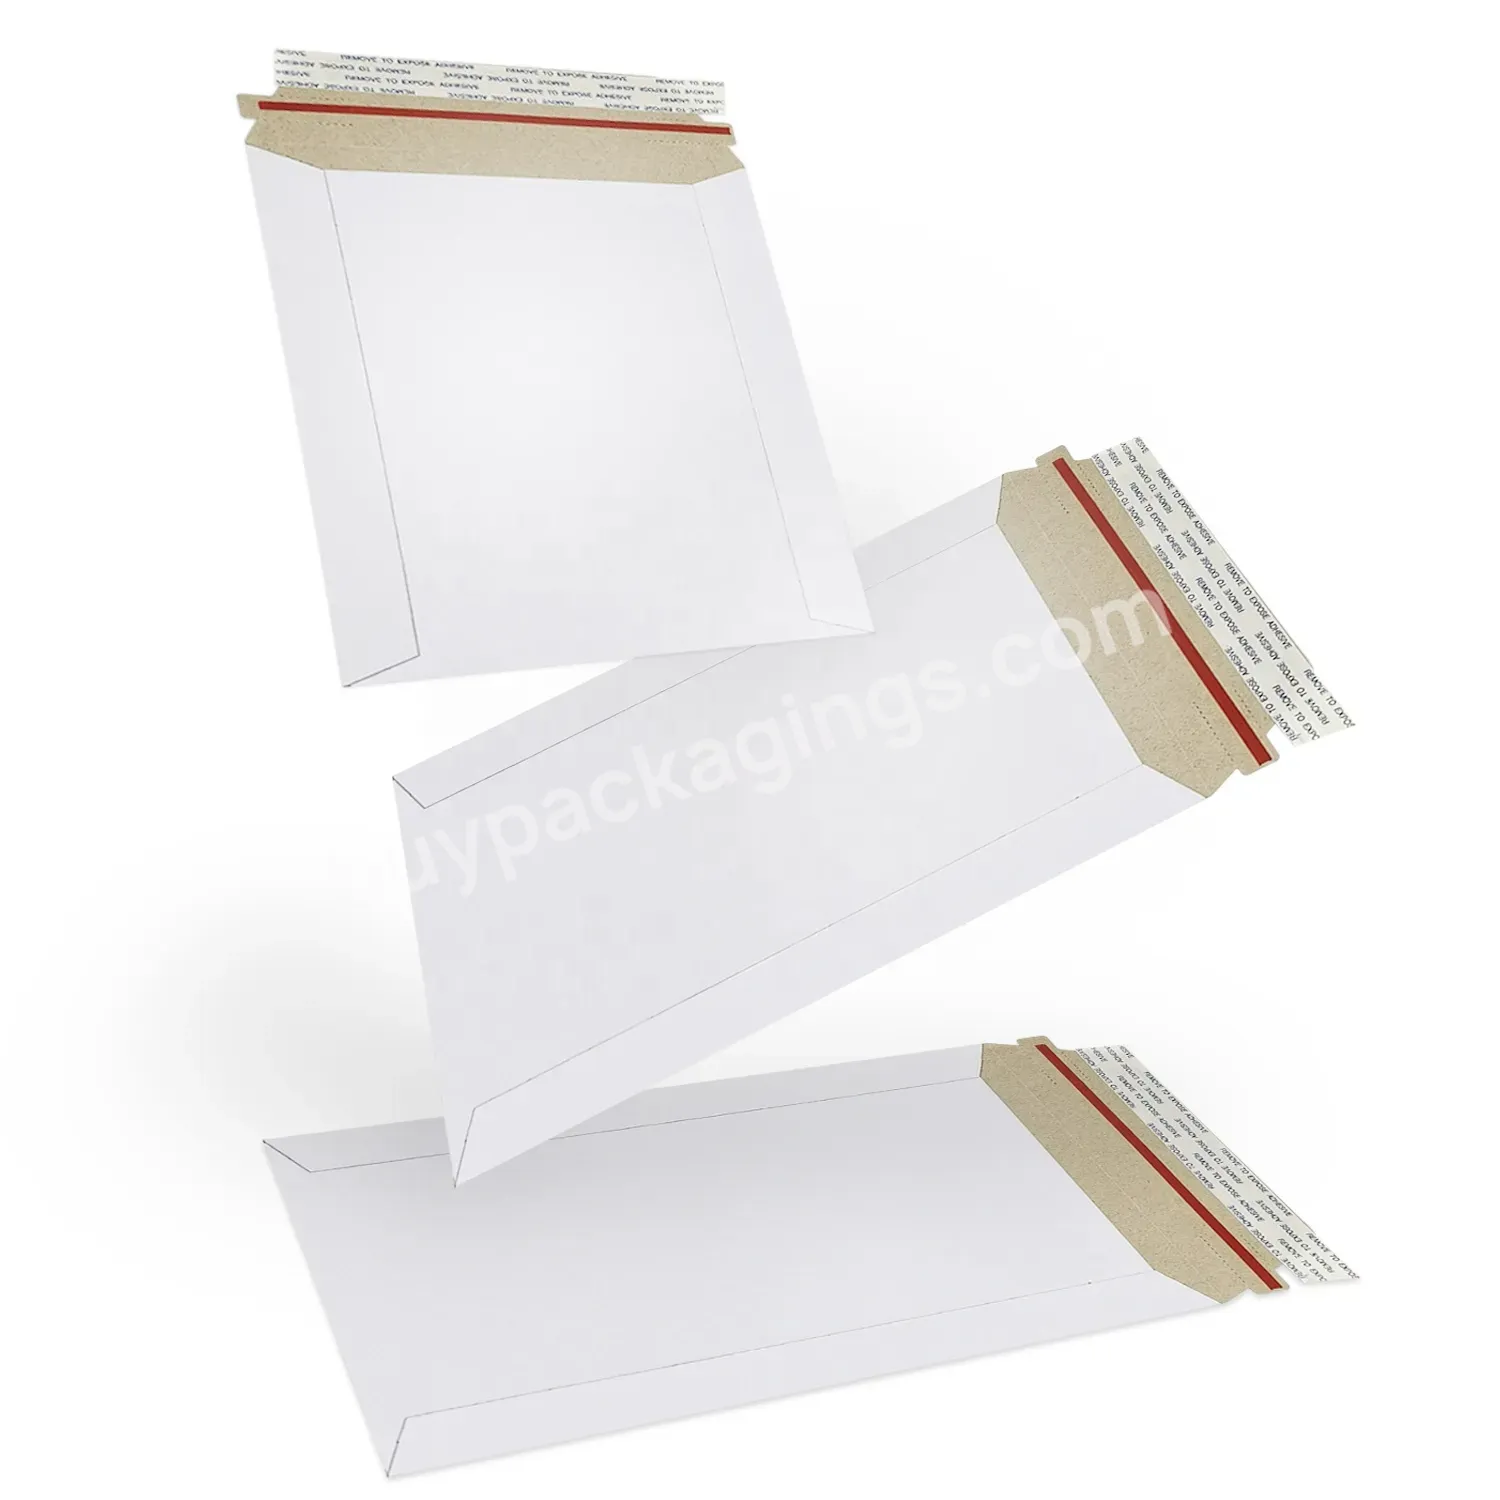 Eco Friendly Rigid Courier Shipping Waybill Pouch Document Packaging Shipping Bag Corrugated Paper Stay Flat Cardboard Mailers - Buy Rigid Flat Mailer,Corrugated Paper Mailers,Document Shipping Bag.